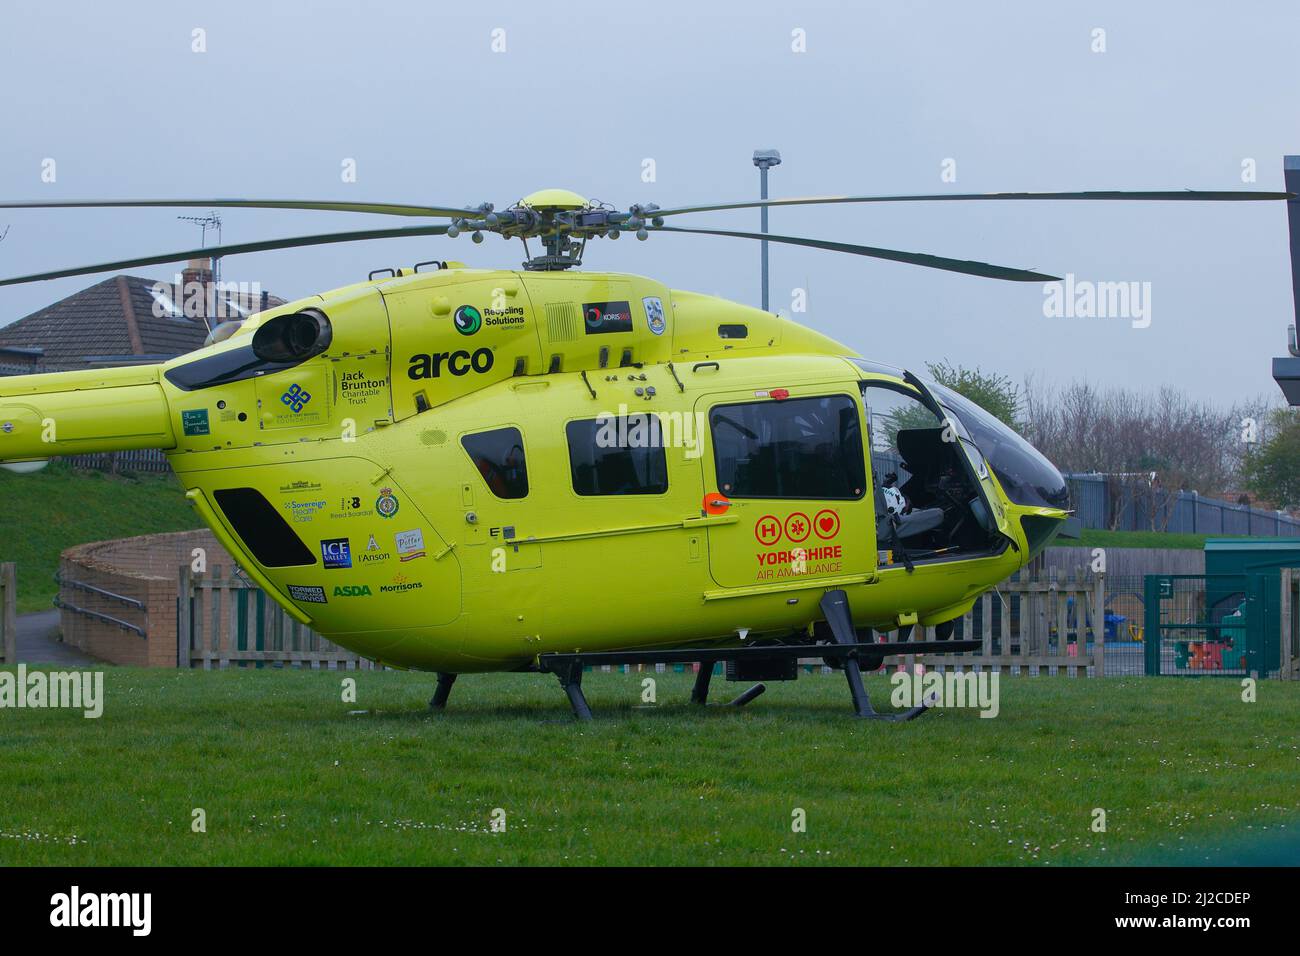 The Yorkshire Air Ambulance seen on the ground at Swillington Primary School in Leeds,Wes tYorkshire,UK Stock Photo